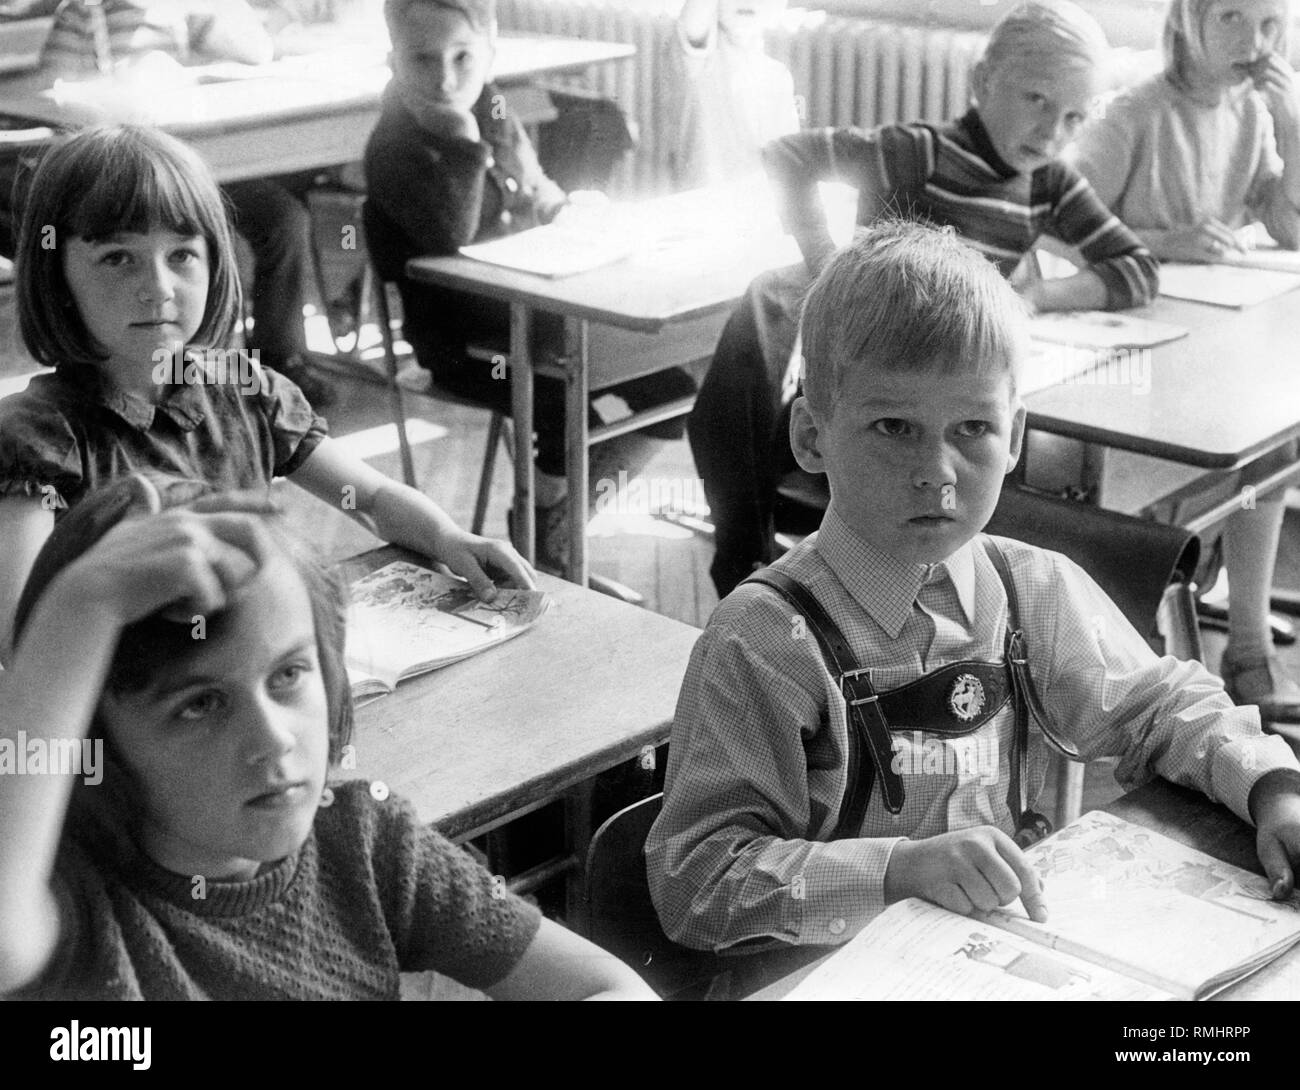 Primary school students during lessons. Stock Photo